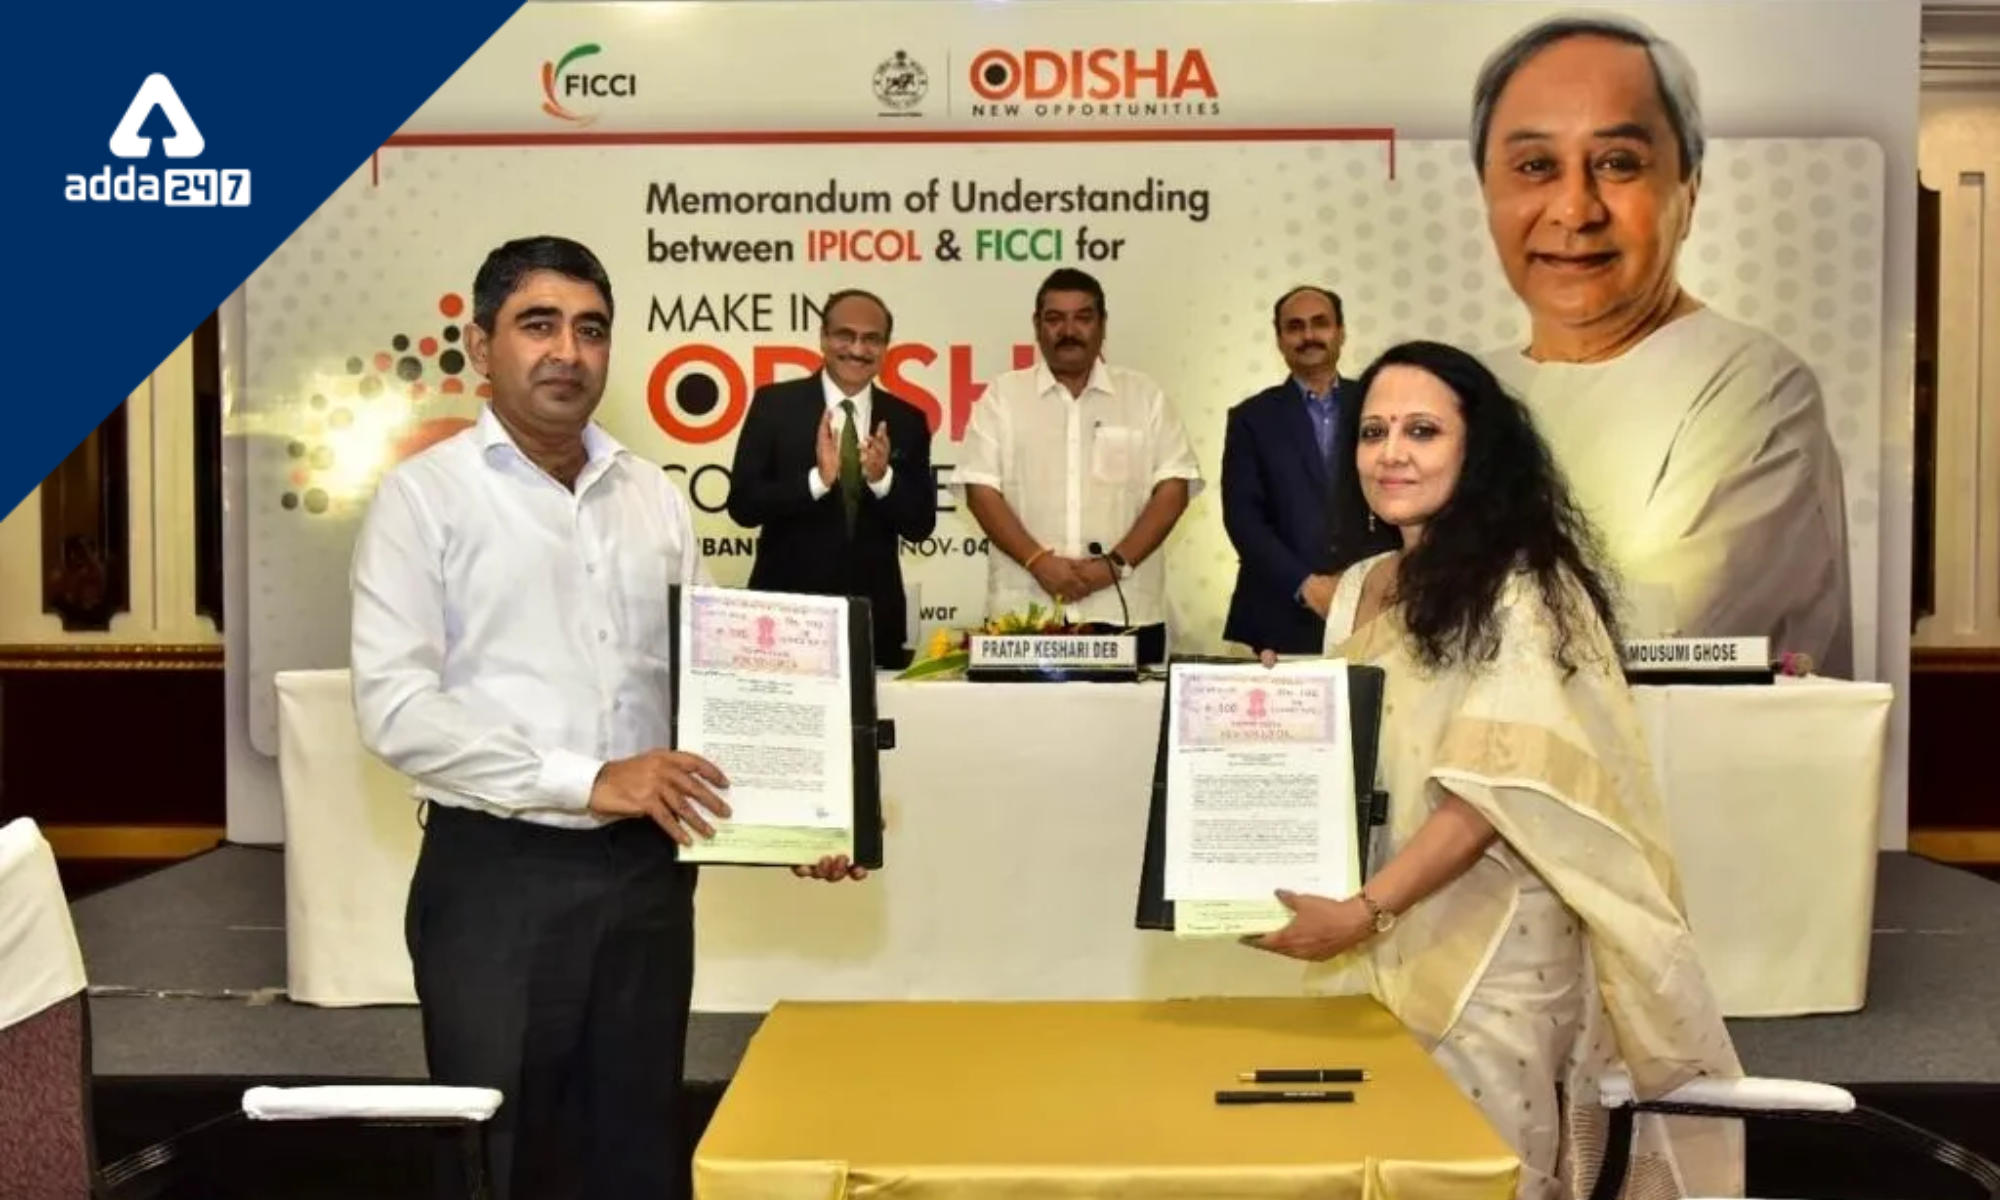 For next "Make in Odisha" summit in 2022, Odisha and FICCI ink an MoU_50.1